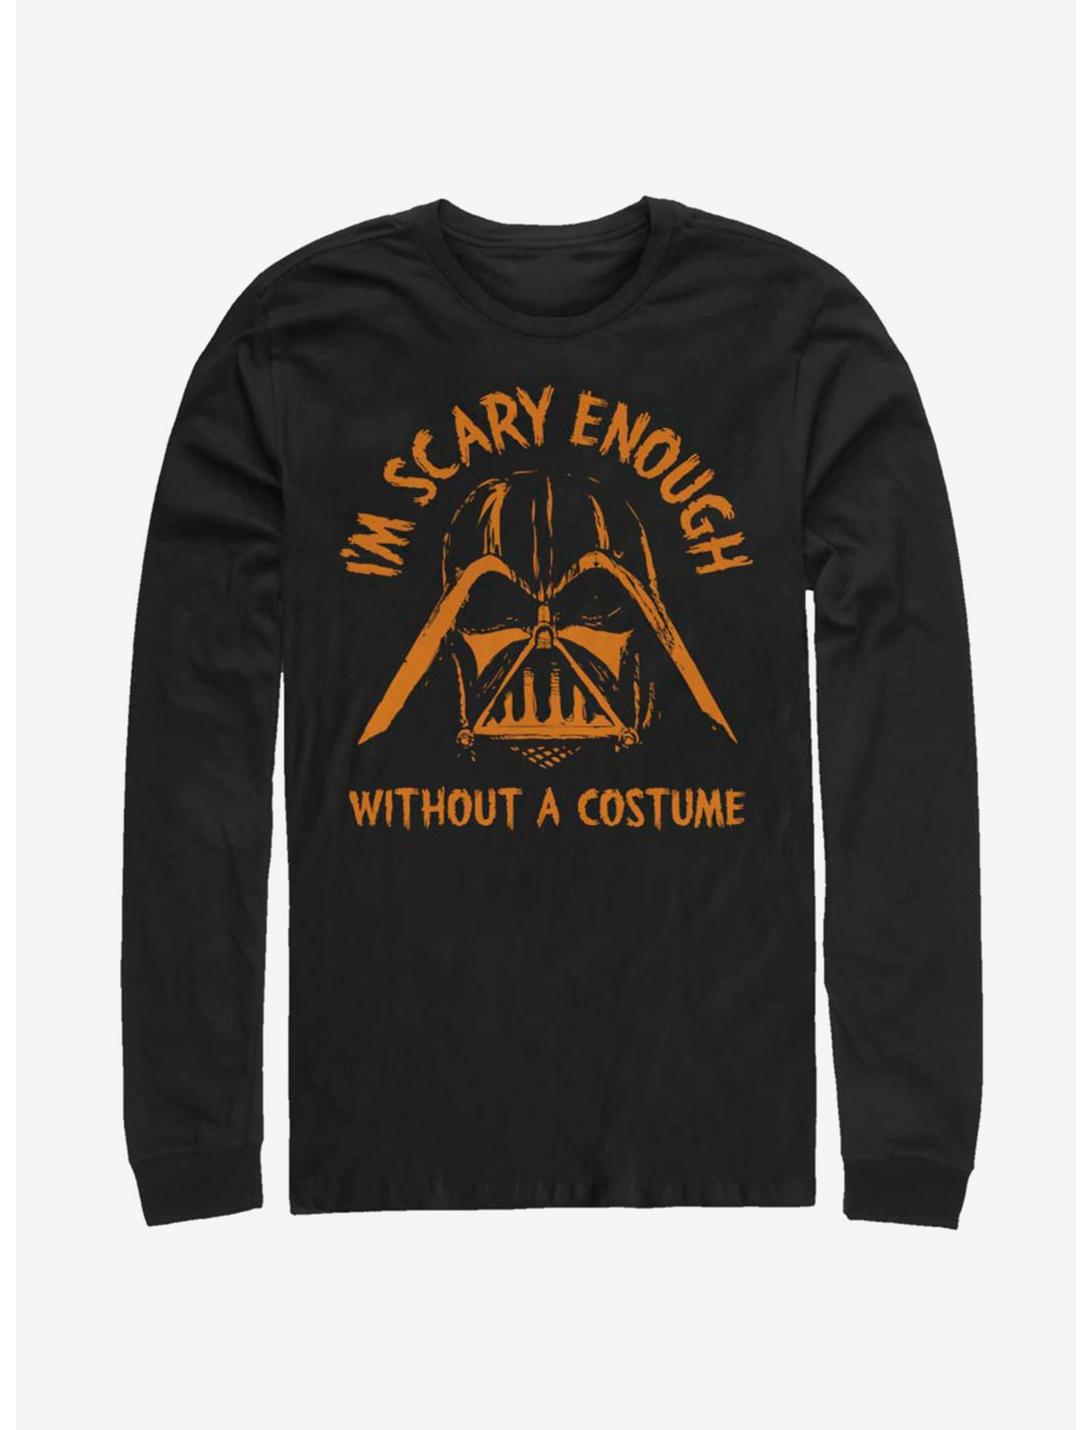 Star Wars Scary Without A Costume Long-Sleeve T-Shirt, BLACK, hi-res